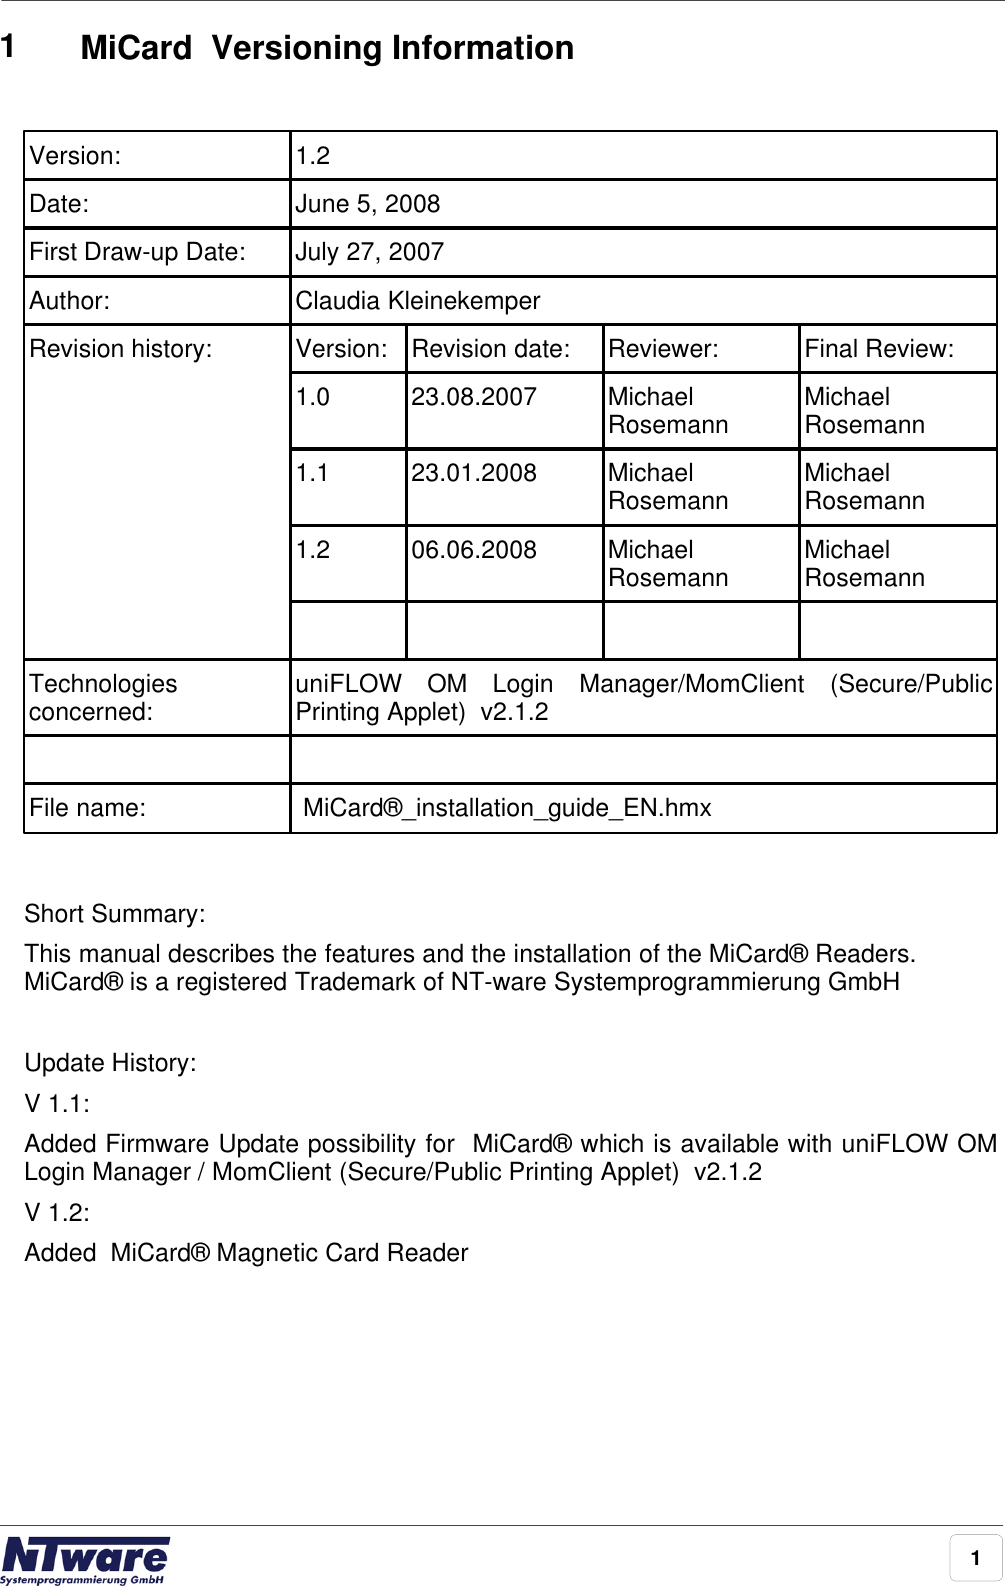 11MiCard  Versioning InformationVersion:1.2Date:June 5, 2008First Draw-up Date:July 27, 2007Author:Claudia KleinekemperRevision history:Version:Revision date:Reviewer:Final Review:1.023.08.2007MichaelRosemannMichaelRosemann1.123.01.2008MichaelRosemannMichaelRosemann1.206.06.2008MichaelRosemannMichaelRosemannTechnologiesconcerned:uniFLOW  OM  Login  Manager/MomClient  (Secure/PublicPrinting Applet)  v2.1.2File name: MiCard®_installation_guide_EN.hmxShort Summary:This manual describes the features and the installation of the MiCard® Readers.MiCard® is a registered Trademark of NT-ware Systemprogrammierung GmbH Update History:V 1.1: Added Firmware Update possibility for  MiCard® which is available with uniFLOW OMLogin Manager / MomClient (Secure/Public Printing Applet)  v2.1.2 V 1.2: Added  MiCard® Magnetic Card Reader